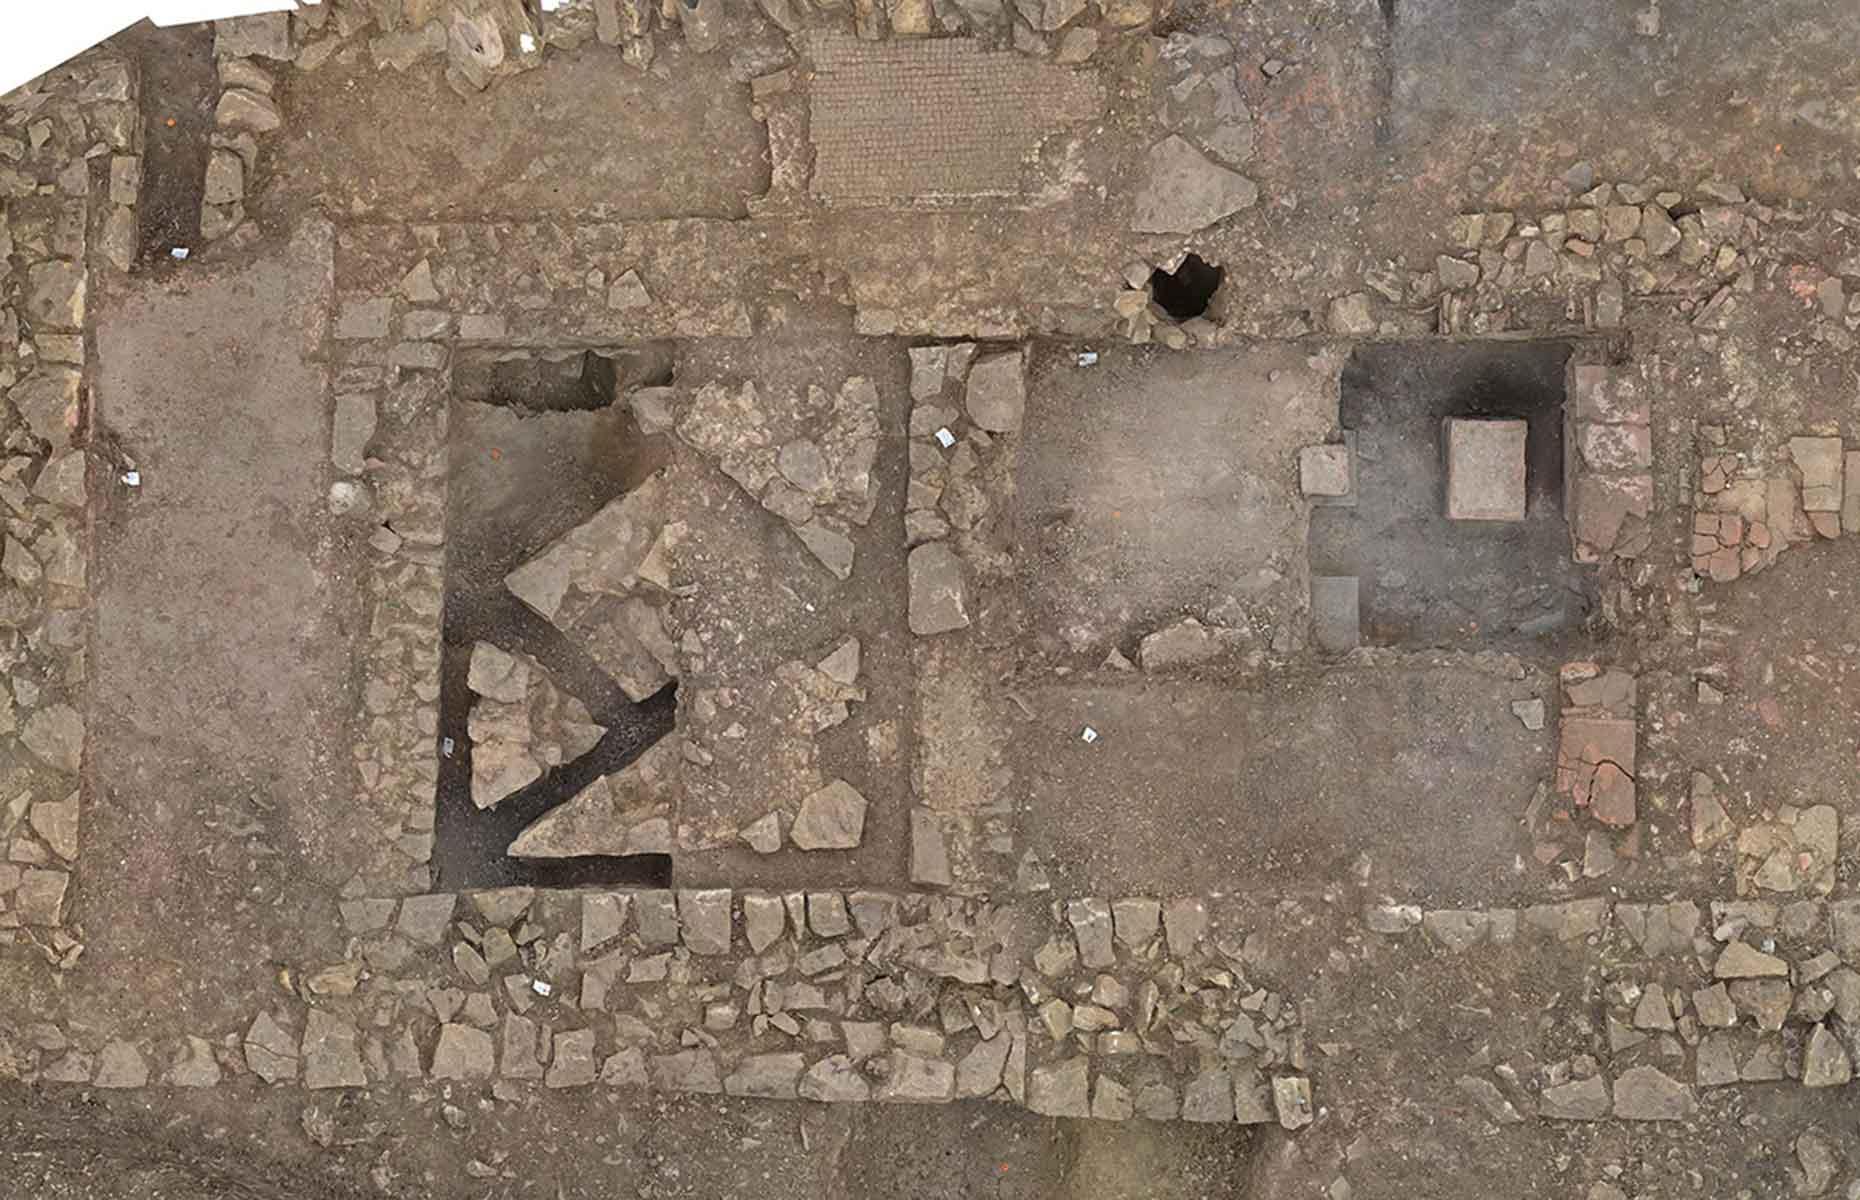 <p>When a grand Roman villa complex was unearthed in Rutland in 2021, archaeologists revealed a rare mosaic depicting a scene from Homer's epic, <em>Iliad</em>. And in 2022, further excavations at the site <a href="https://www.theguardian.com/uk-news/2022/nov/28/ancient-barn-conversion-with-steam-room-found-at-roman-villa-in-rutland">uncovered one of Britain's earliest barn conversions</a>. Experts believe the timber-built barn was converted to stone in the 3rd or 4th century AD to provide space for a Roman bathing suite (pictured), complete with a hot steam room, a warm room, a cold plunge pool and underfloor heating, while the other end was likely retained for agricultural or craft work. Talk about the life of luxury...</p>